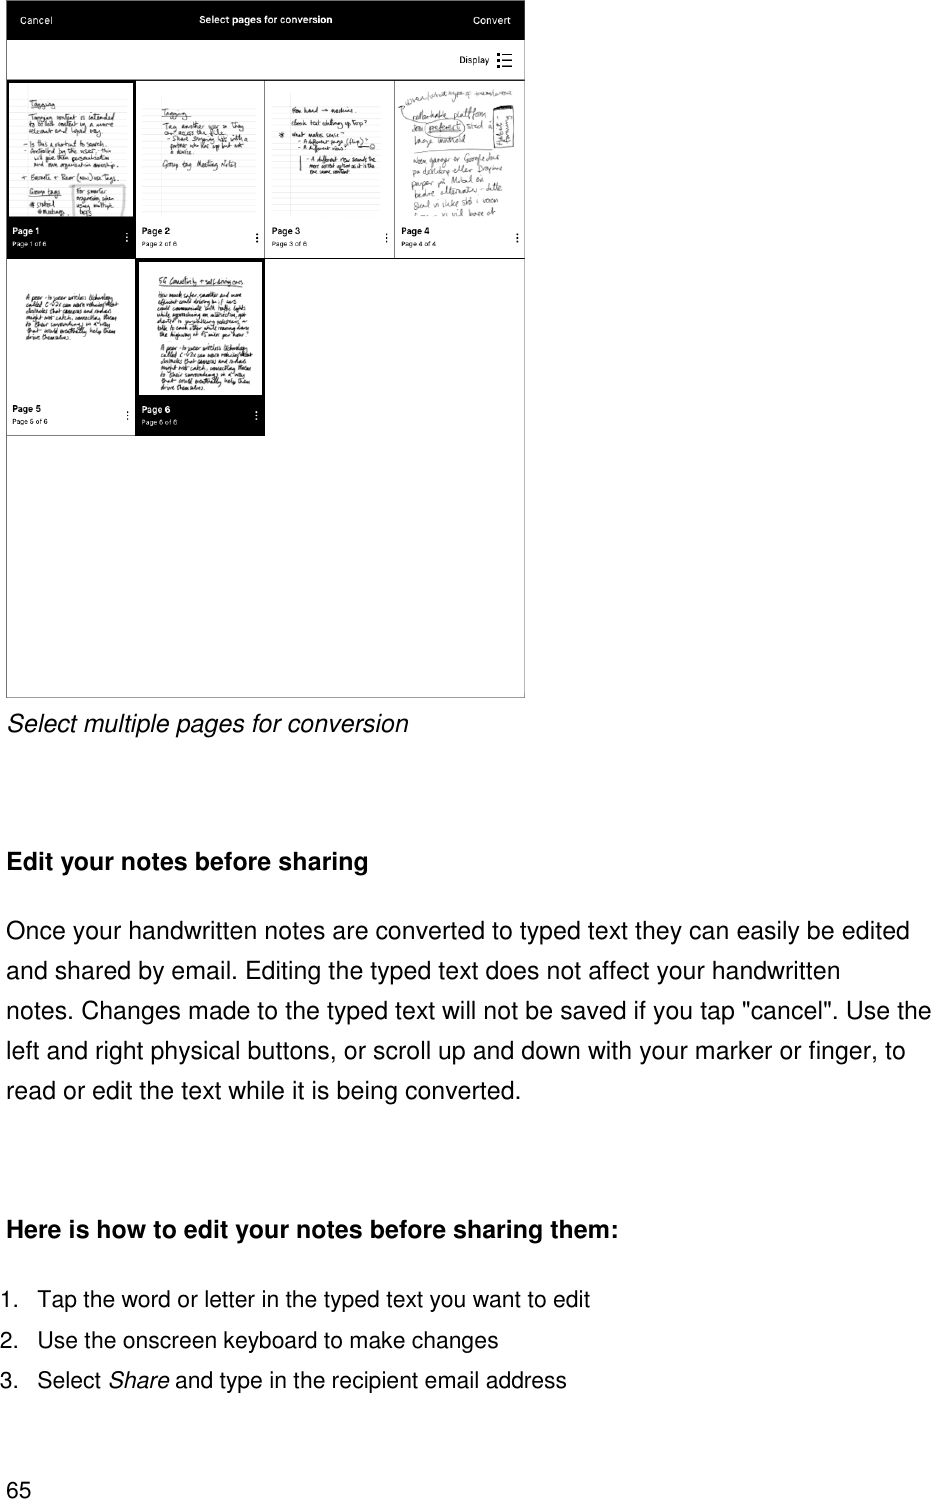 65   Select multiple pages for conversion   Edit your notes before sharing Once your handwritten notes are converted to typed text they can easily be edited and shared by email. Editing the typed text does not affect your handwritten notes. Changes made to the typed text will not be saved if you tap &quot;cancel&quot;. Use the left and right physical buttons, or scroll up and down with your marker or finger, to read or edit the text while it is being converted.    Here is how to edit your notes before sharing them: 1.  Tap the word or letter in the typed text you want to edit 2.  Use the onscreen keyboard to make changes 3.  Select Share and type in the recipient email address  